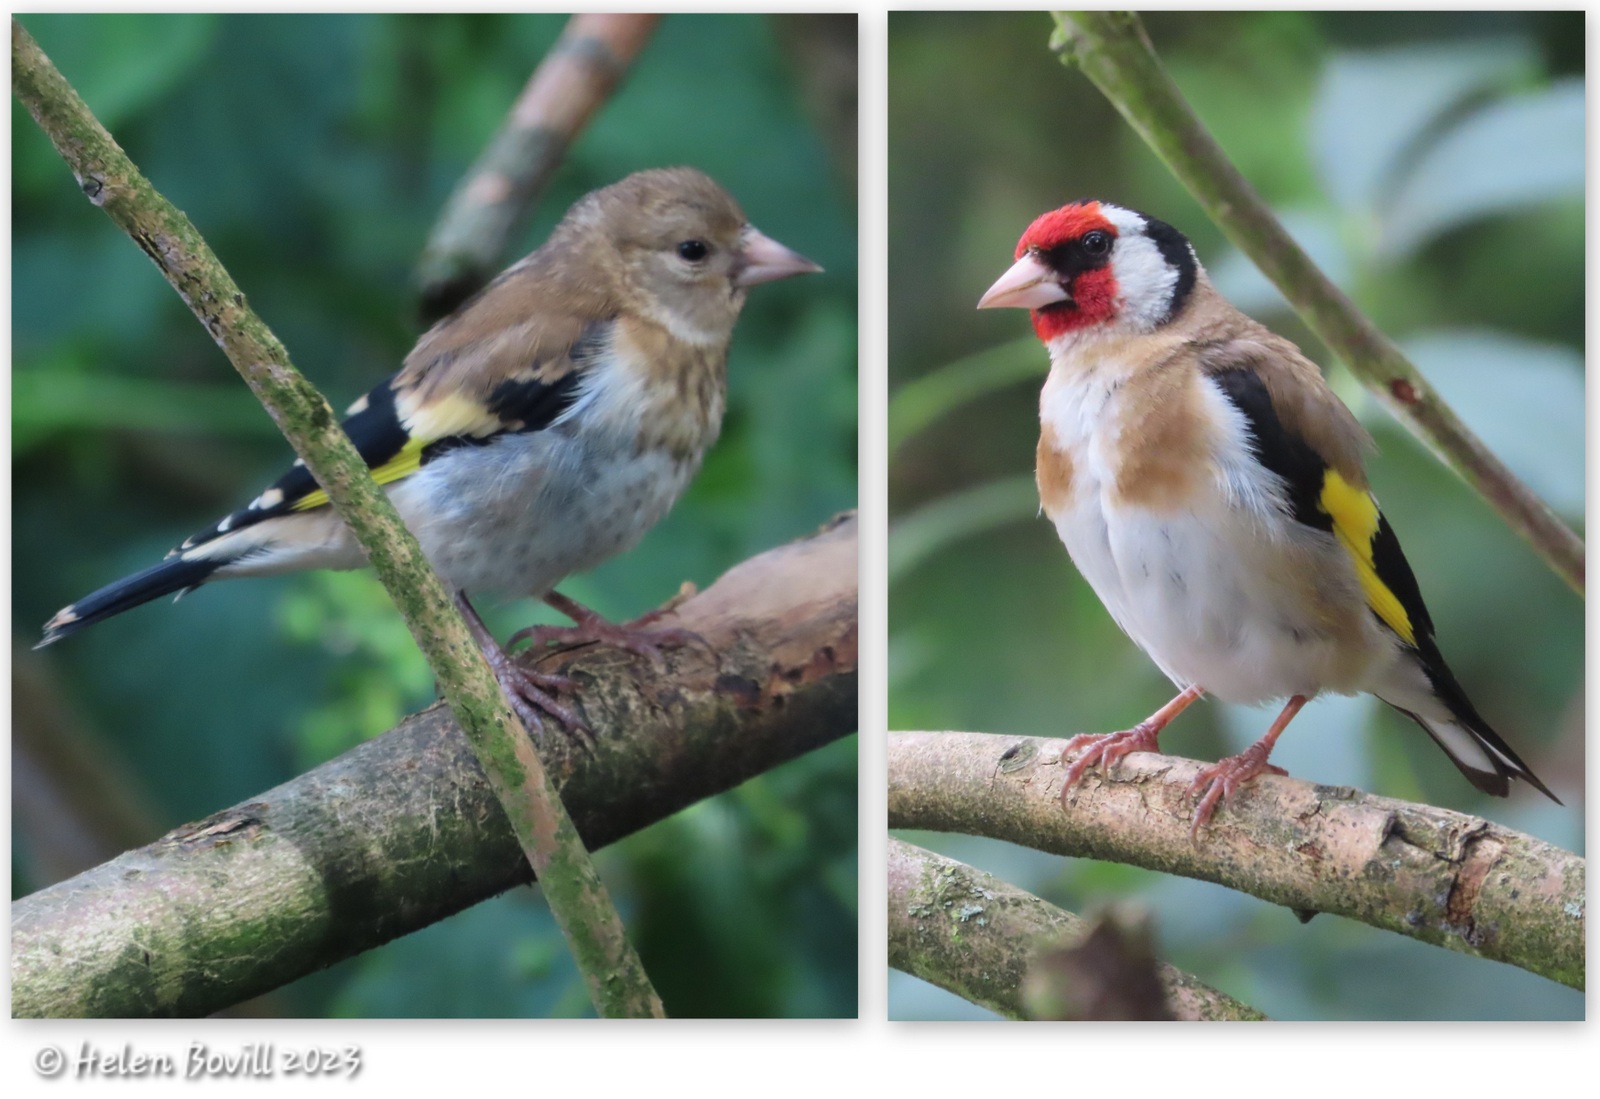 Two photos showing a young Goldfinch and an adult Goldfinch on a tree in the cemetery